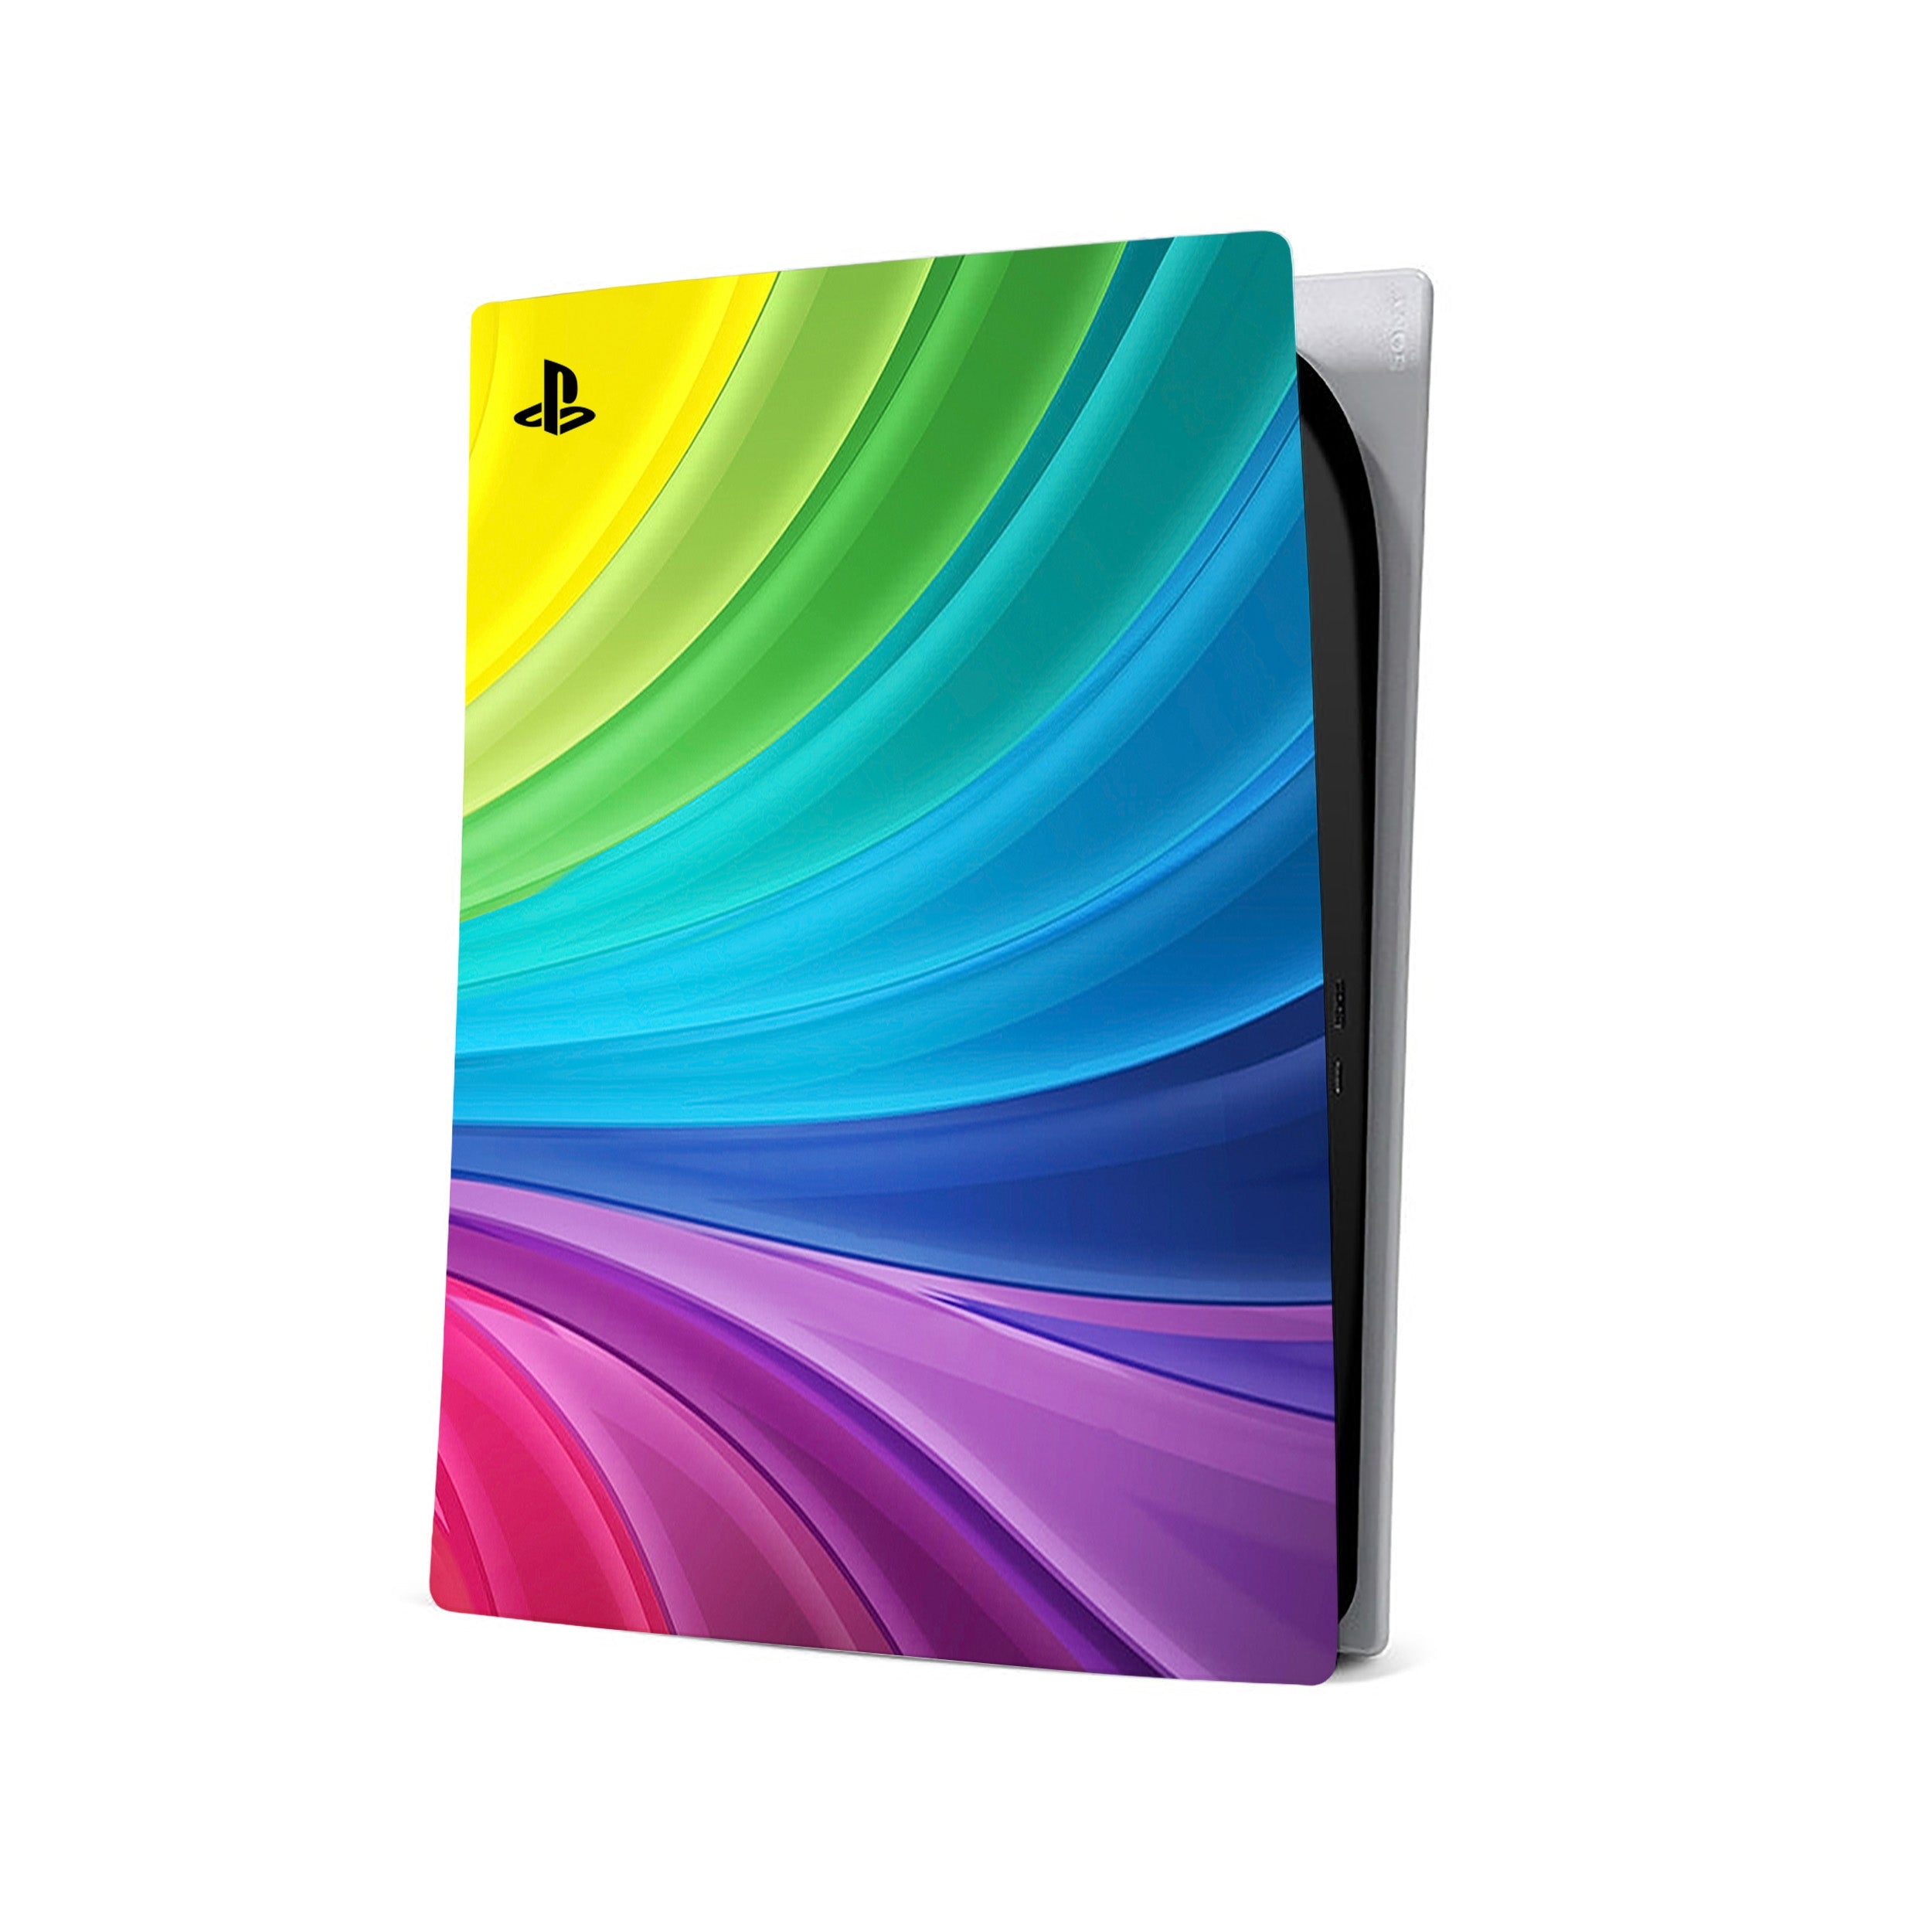 A video game skin featuring a Colorful Rainbow Swirl design for the PS5.